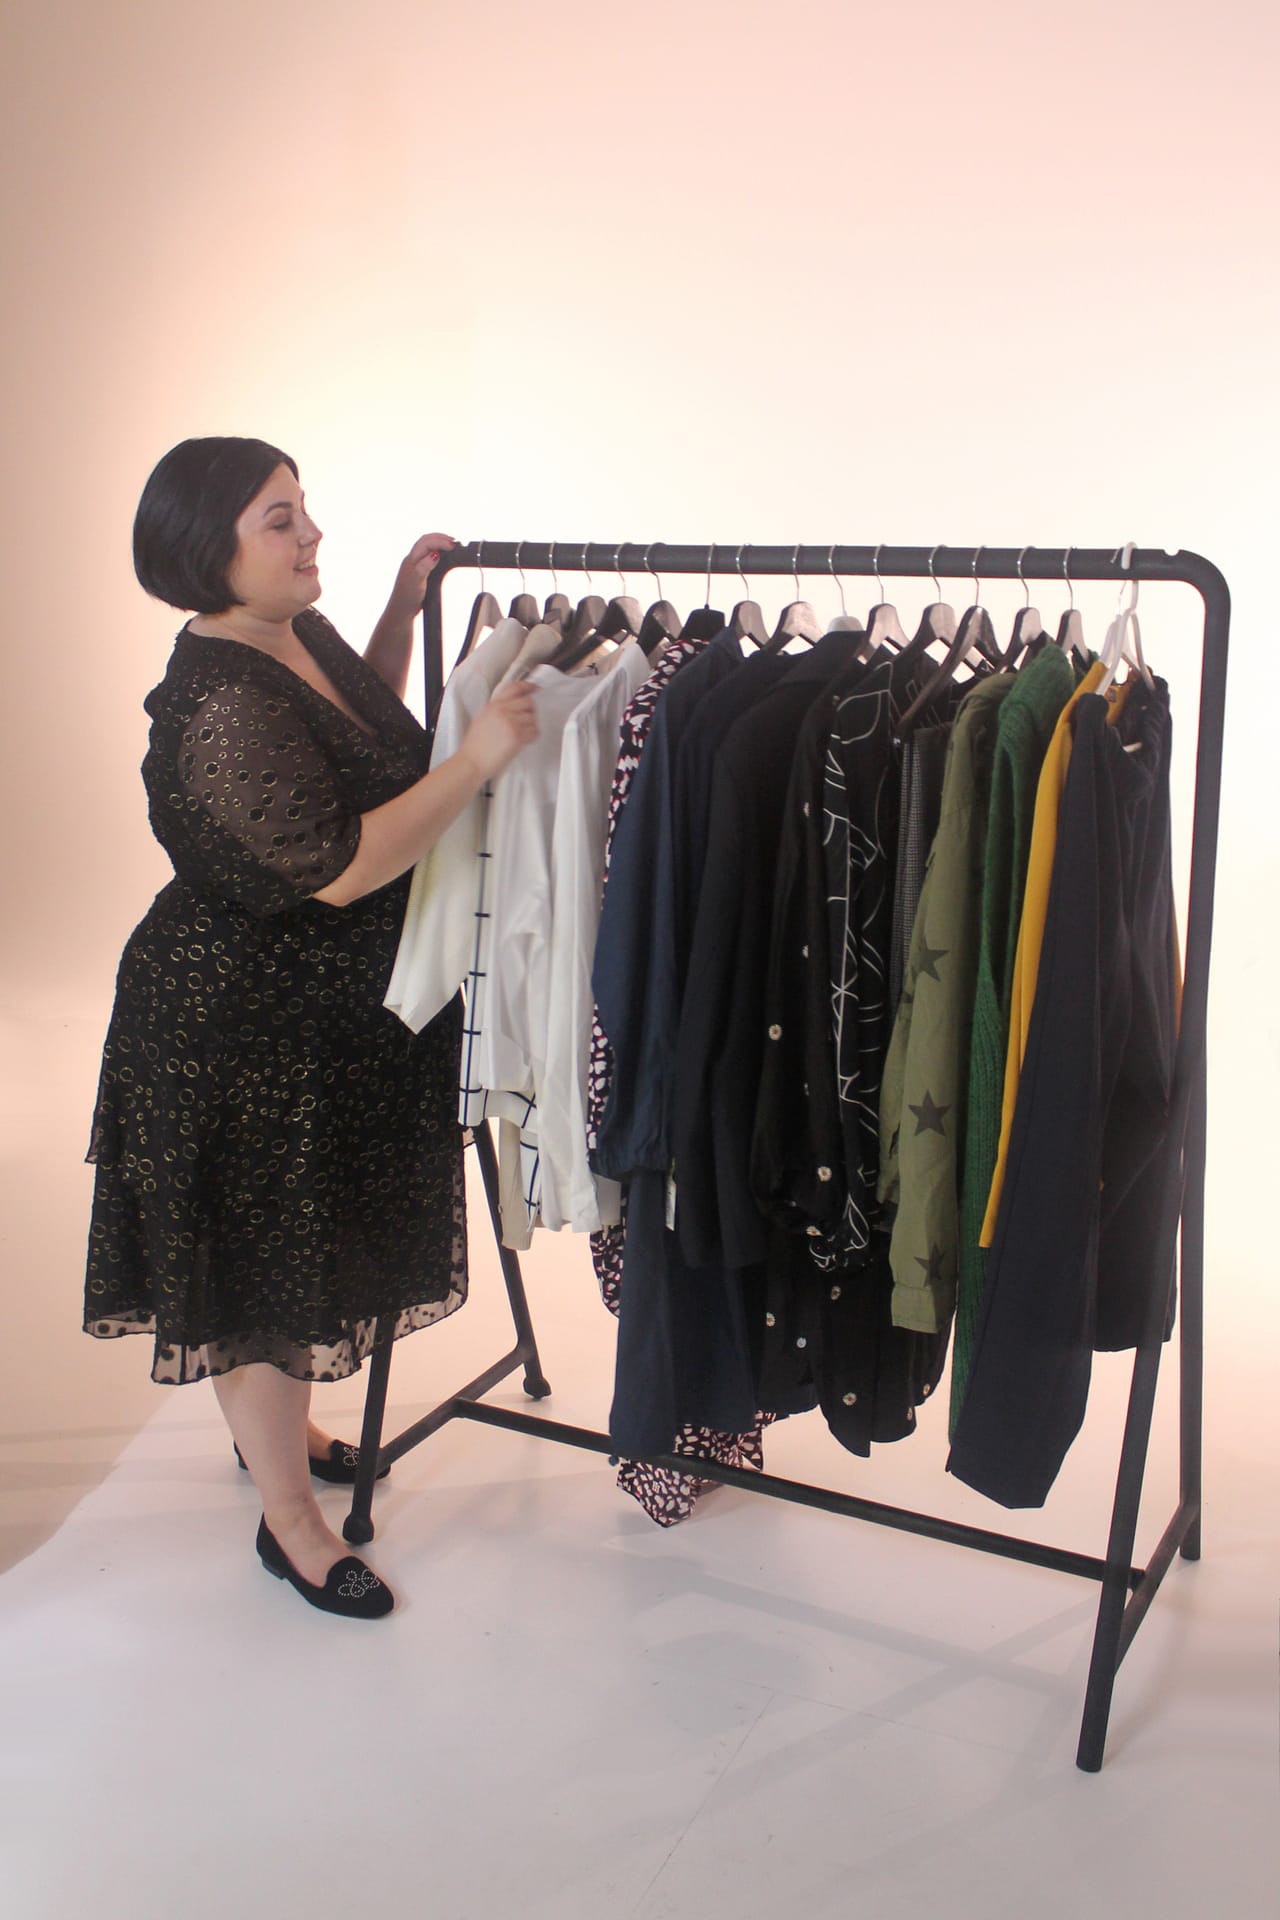 Plus Size Clothing and Personal Styling for Women